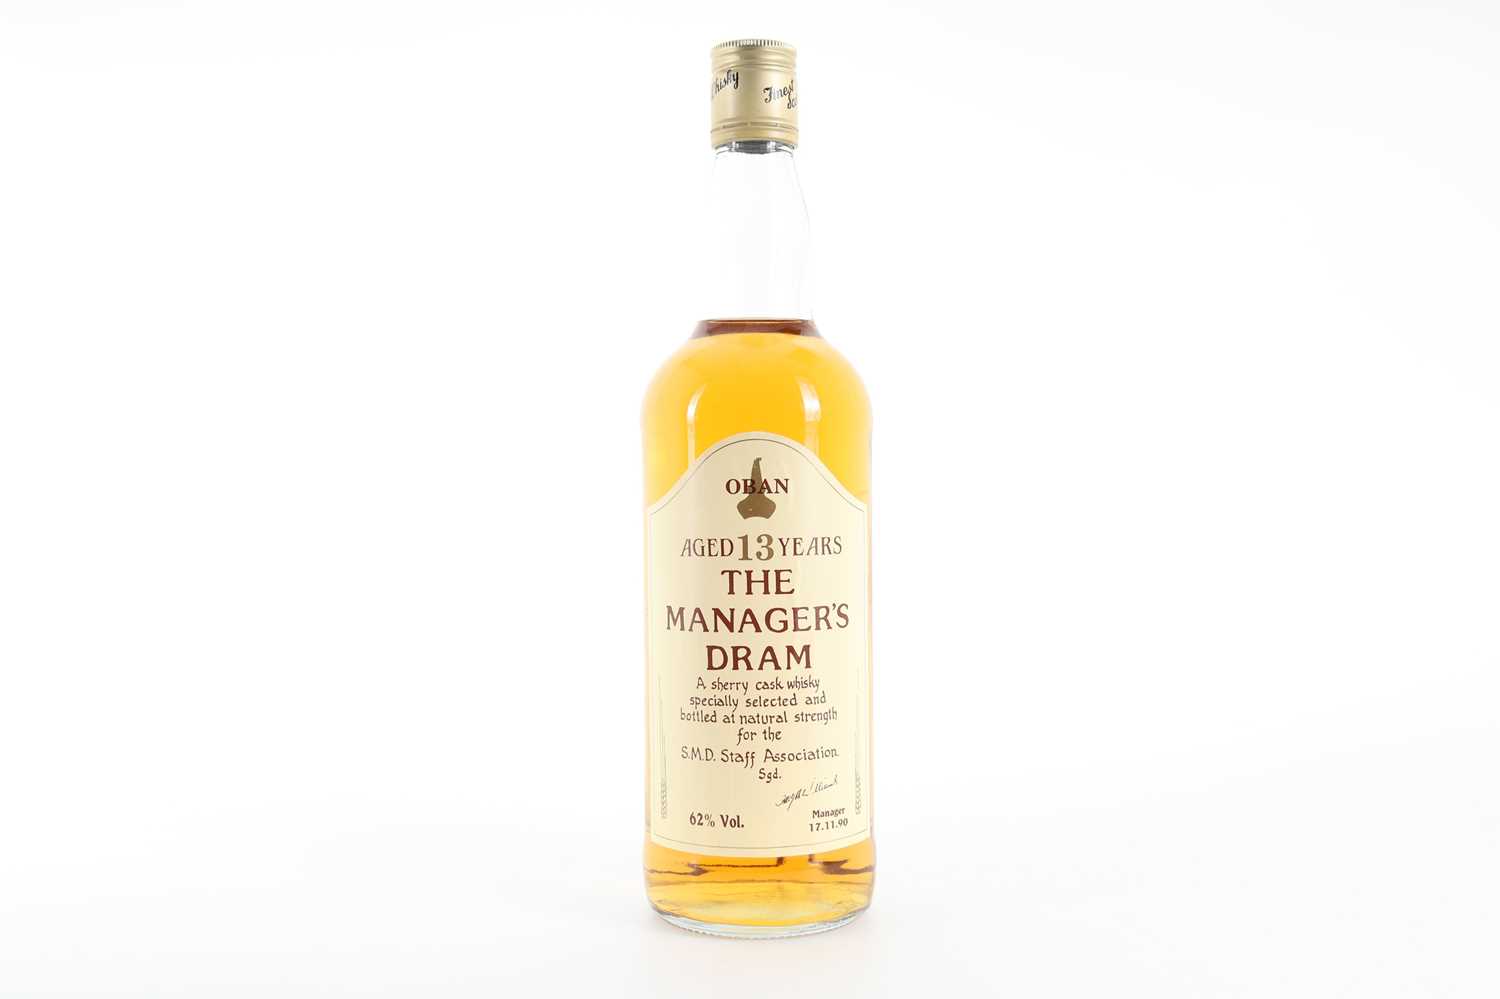 Lot 193 - OBAN 13 YEAR OLD MANAGER'S DRAM 75CL